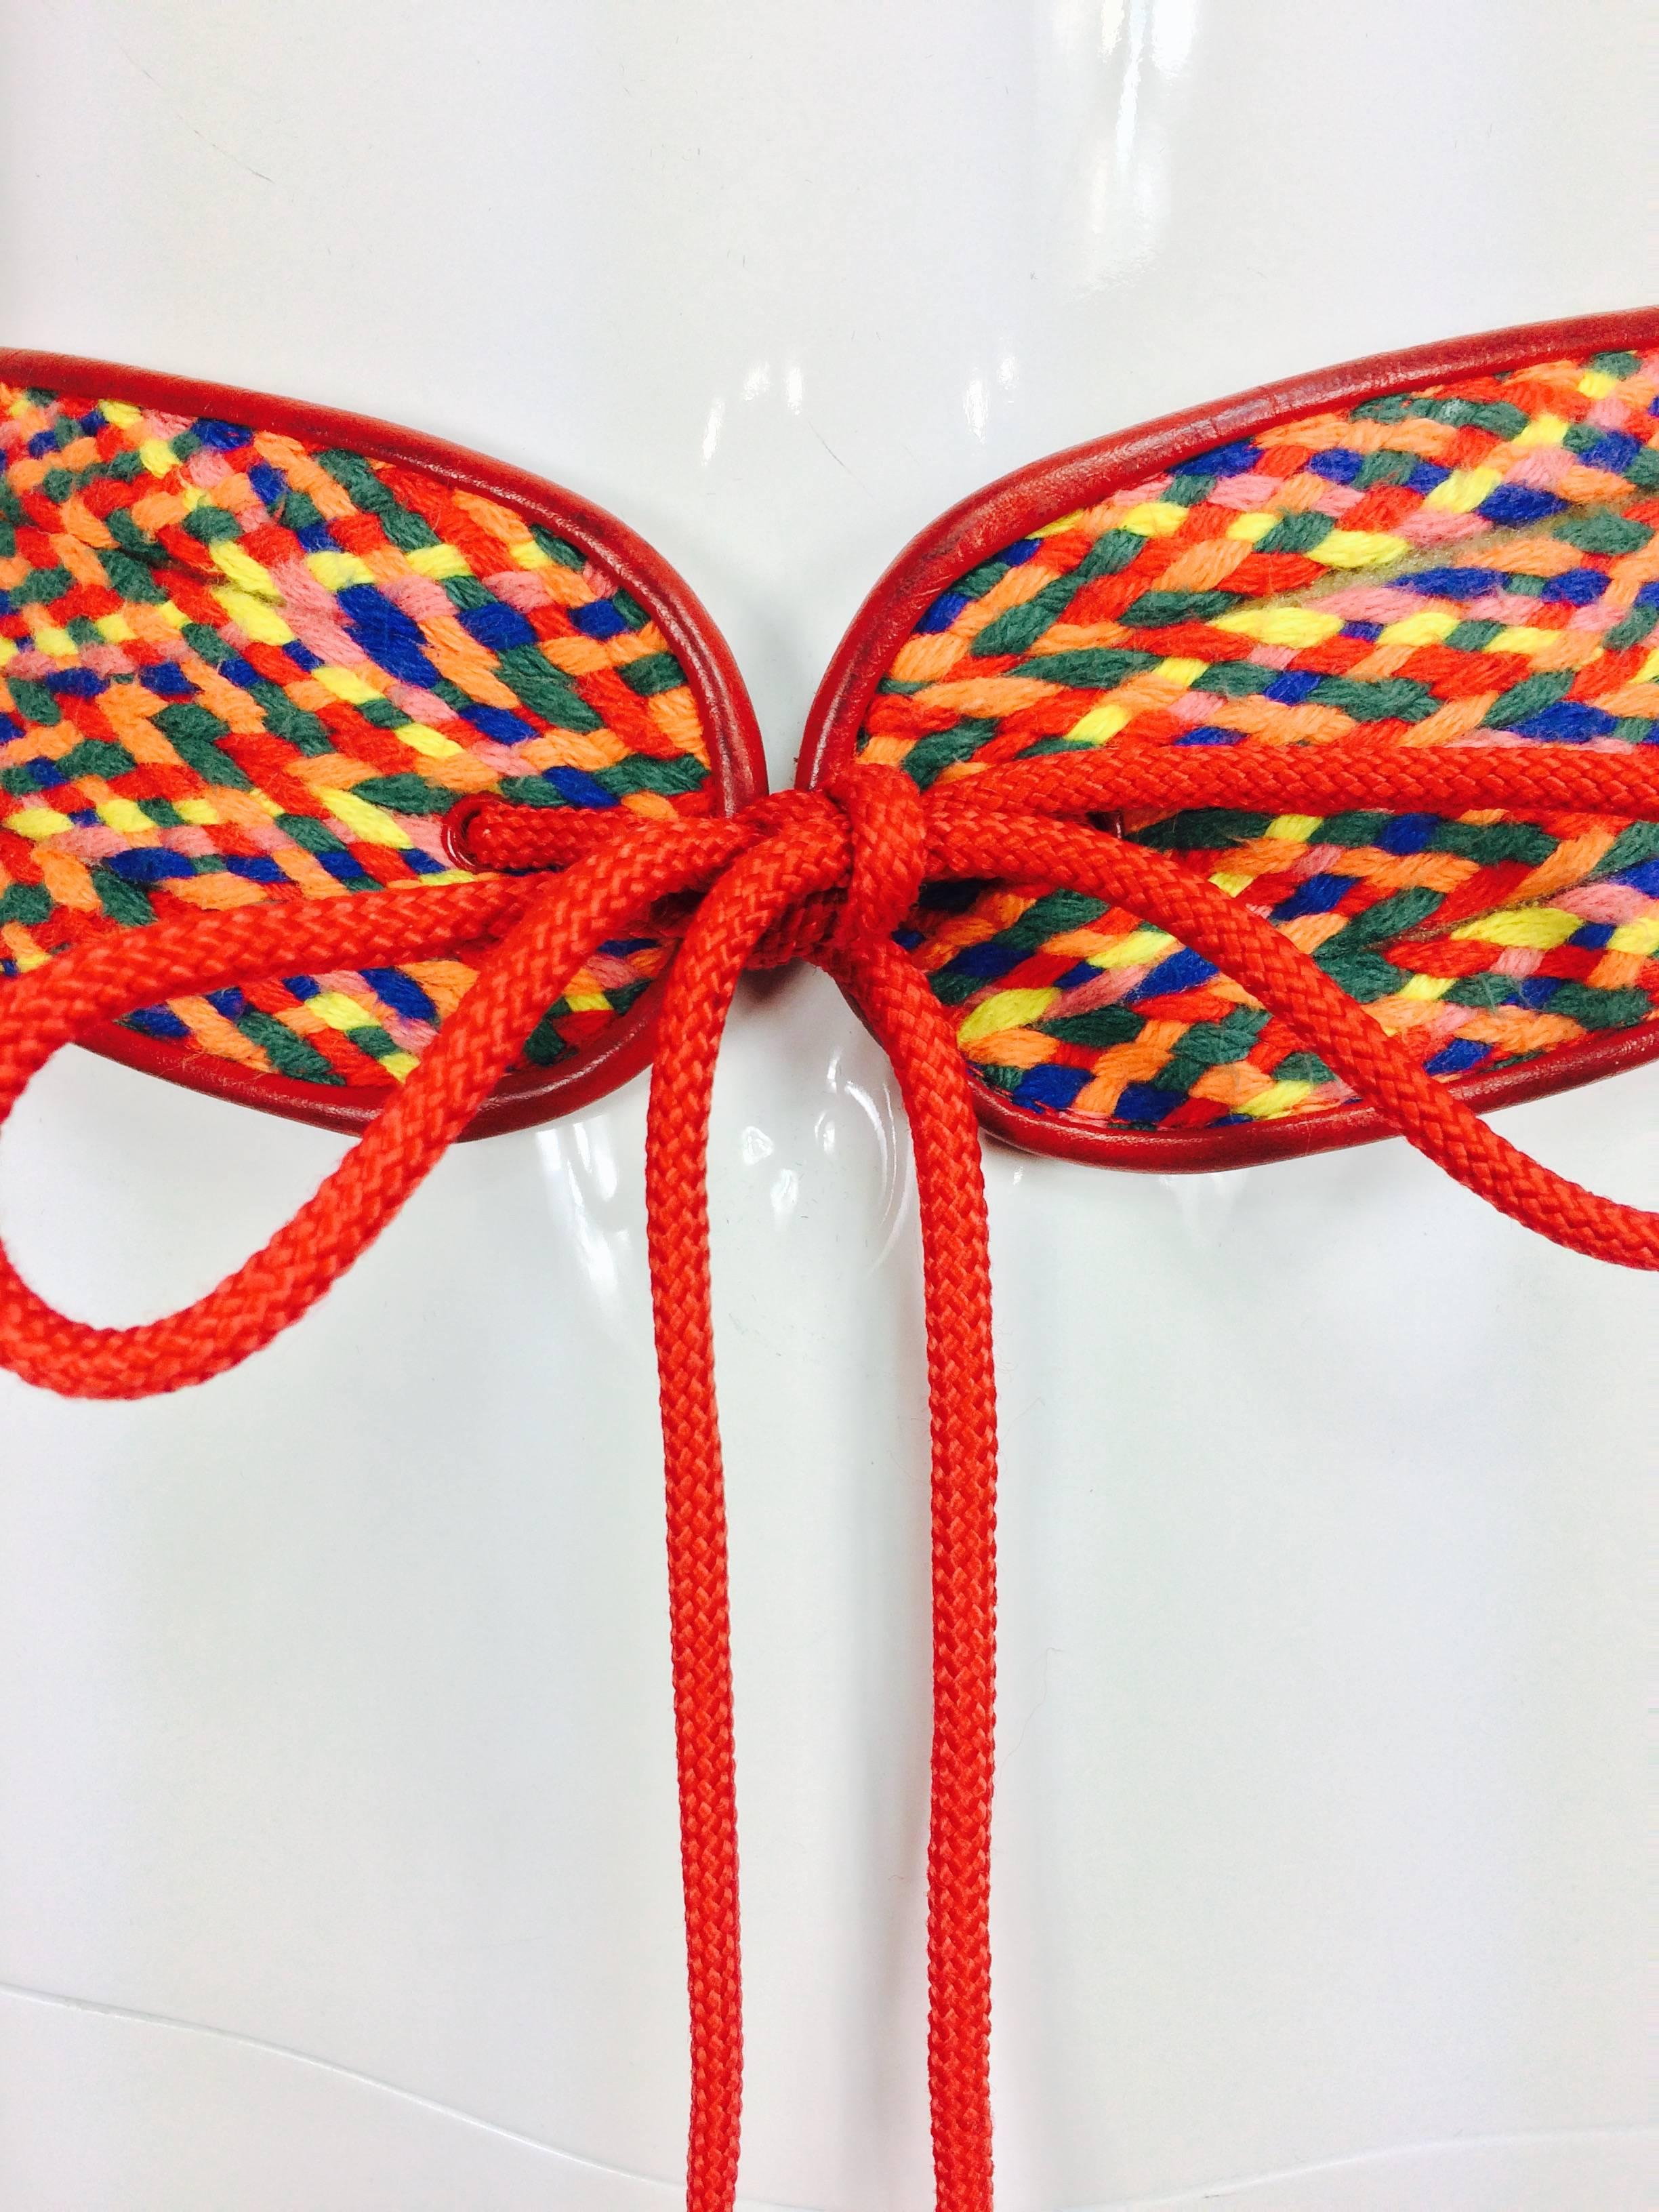 Vintage Yves Saint Laurent woven coloured cord and leather belt 1960s...Wide woven cord in red, orange, green and yellow trimmed with red leather...Closes at the front with long red cord ties each end has a red wooden bead...Marked size B